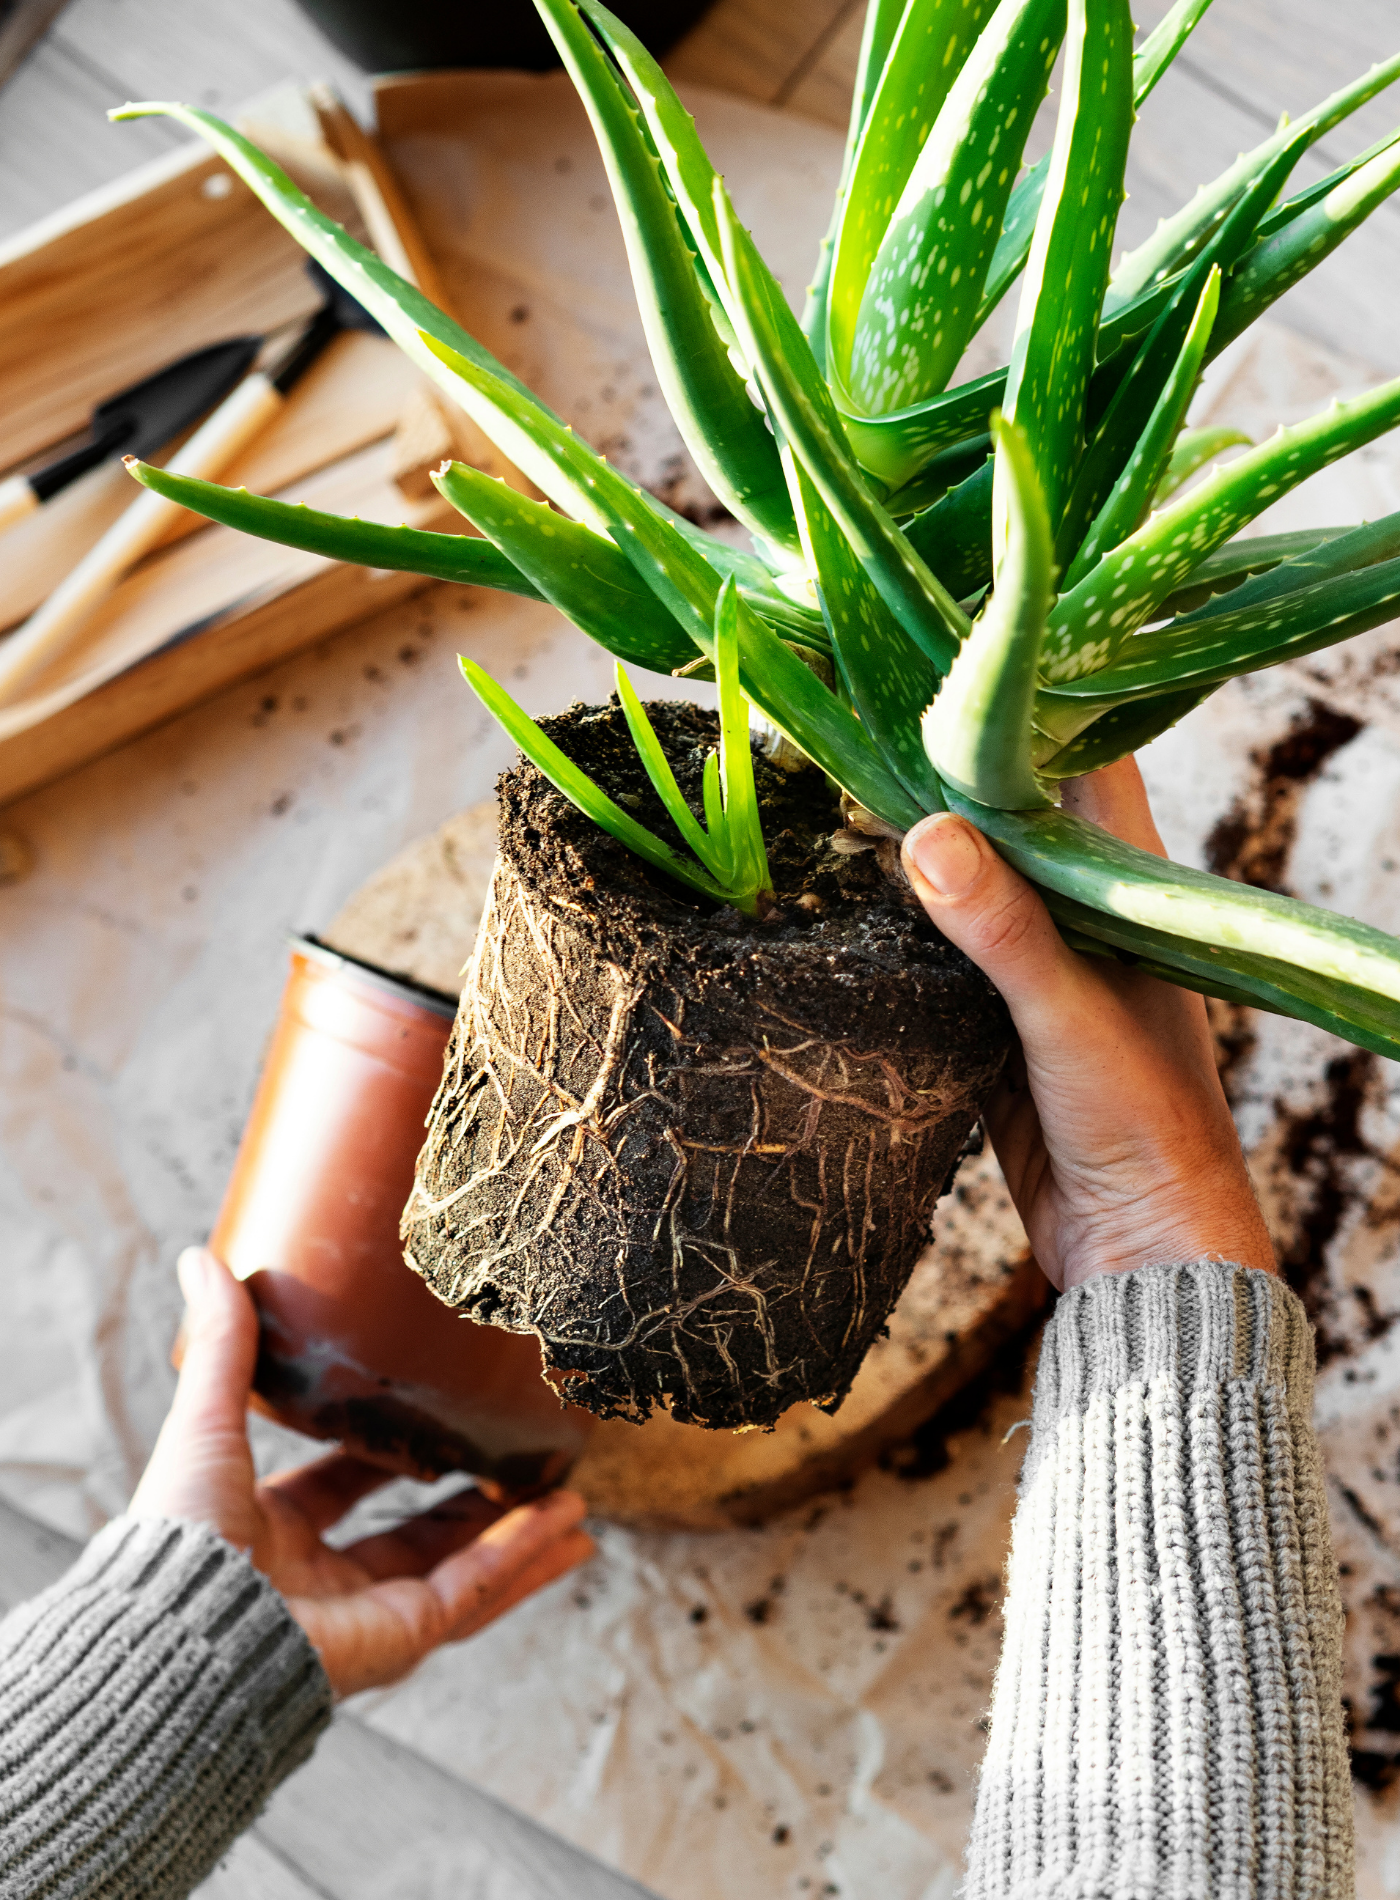 Favorite Online Resources for Houseplants